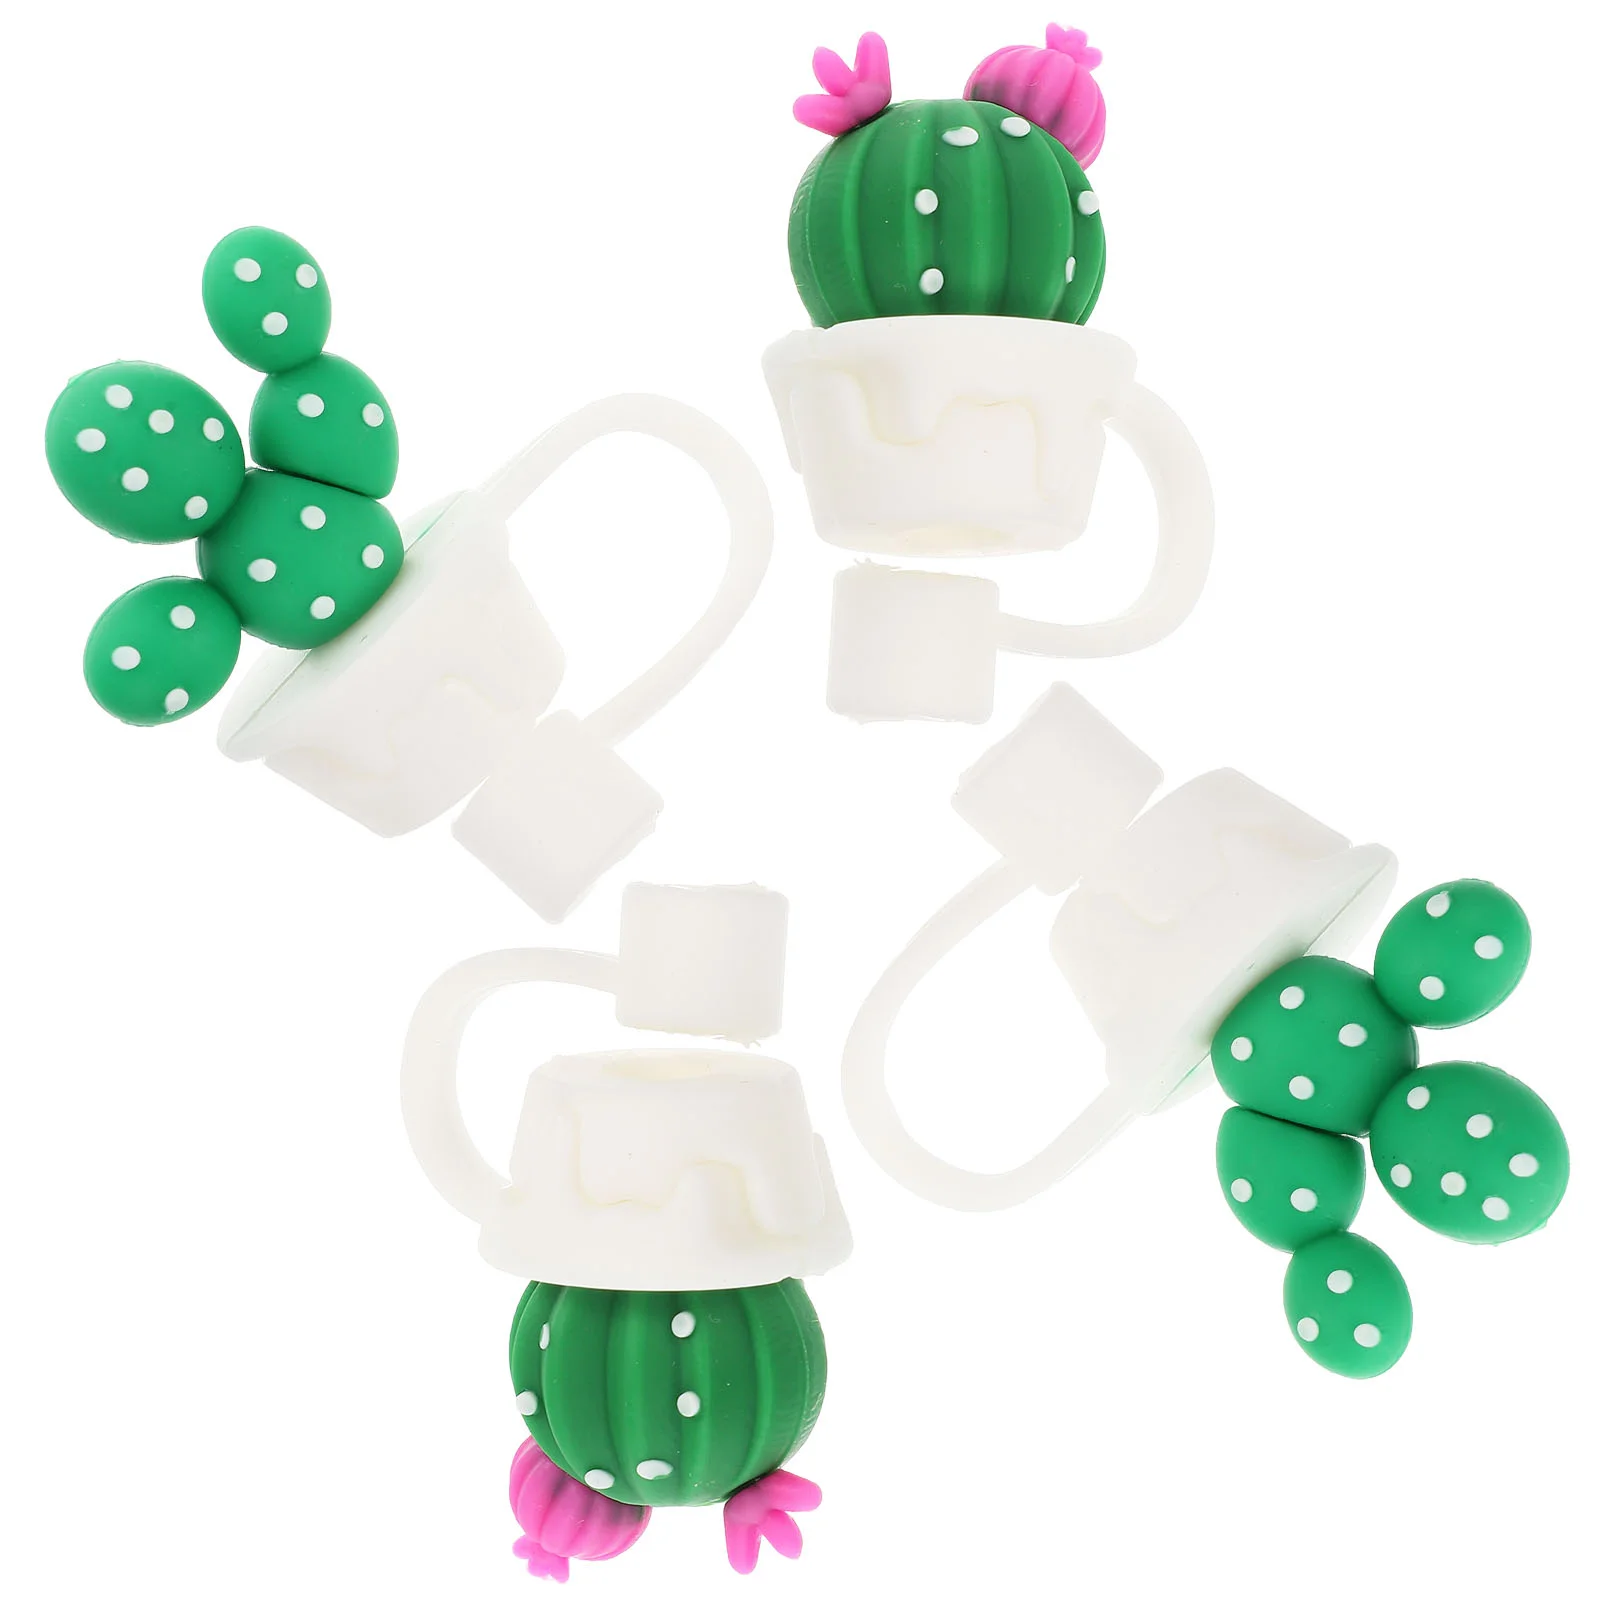 

4 Pcs Cactus Straw Plugs Silicone Topper Cap Tips Protector End Protectors Segue Reusable Drinking Lid Pvc Supplies